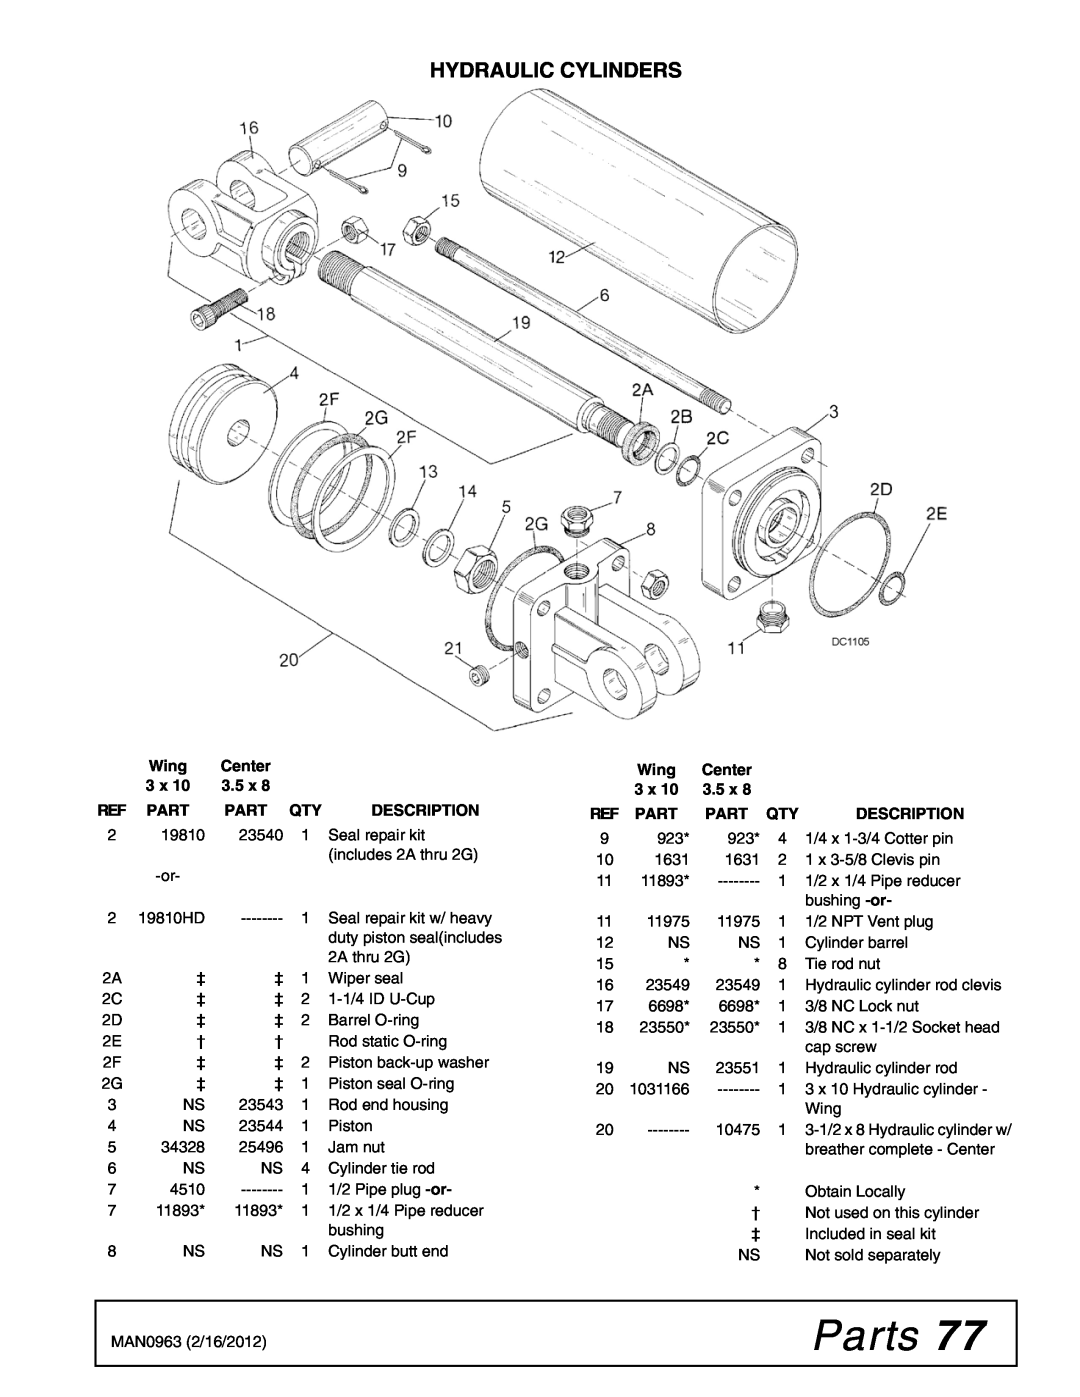 Woods Equipment BW180XHDQ, BW126XHDQ manual Parts, Hydraulic Cylinders, Wing, Center, 3.5 x, Description 